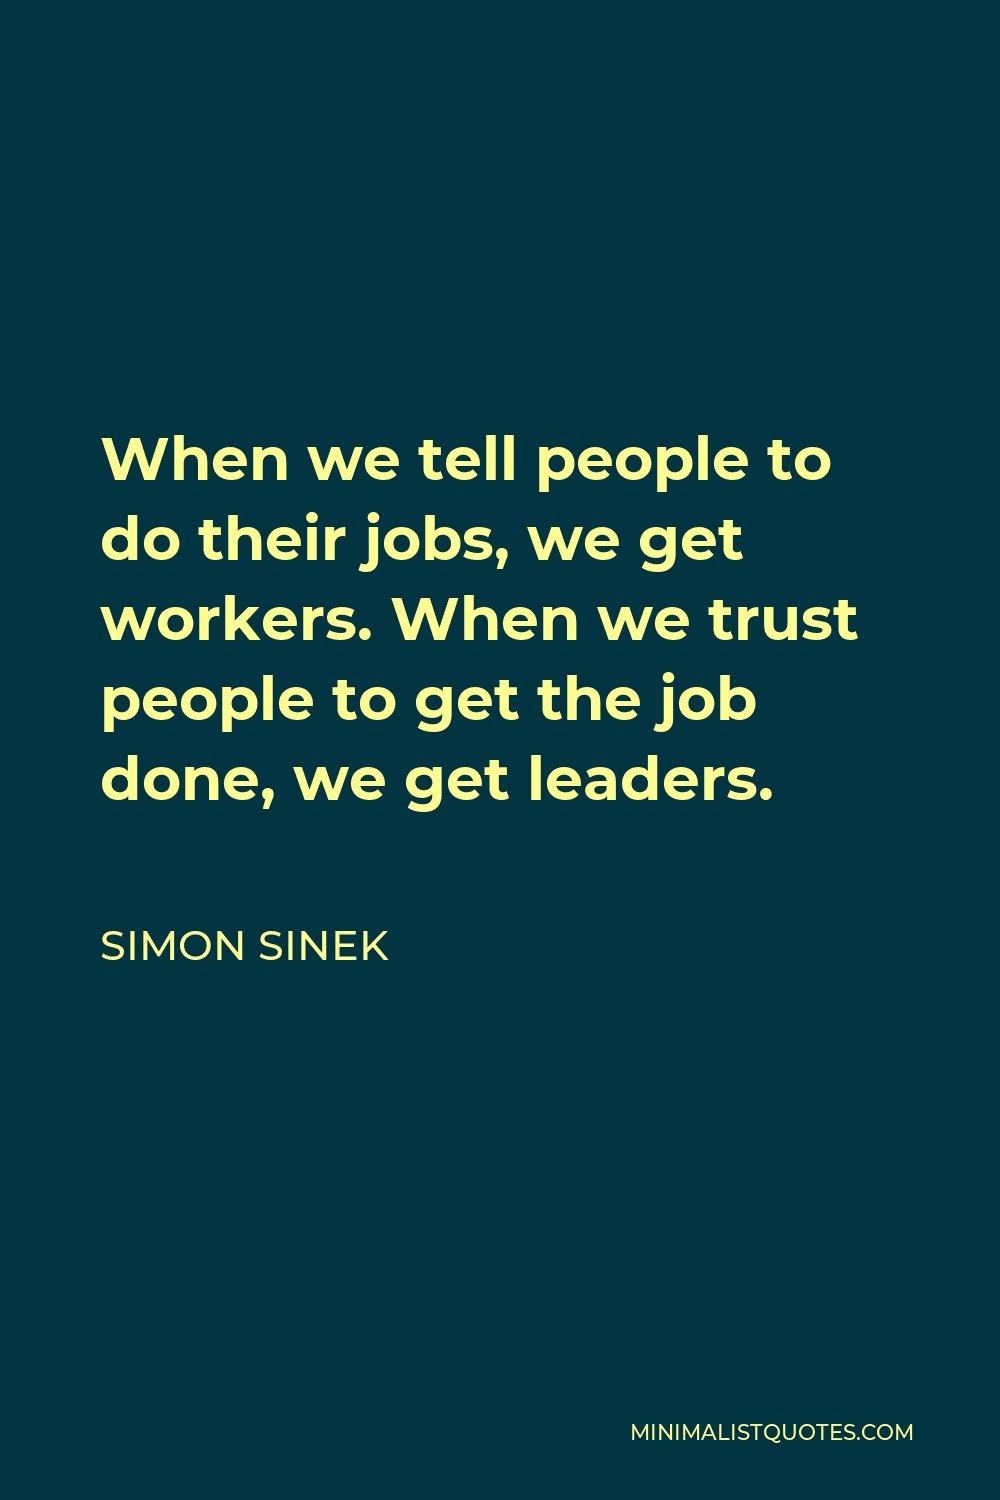 Simon Sinek Quote - When we tell people to do their jobs, we get workers. When we trust people to get the job done, we get leaders.